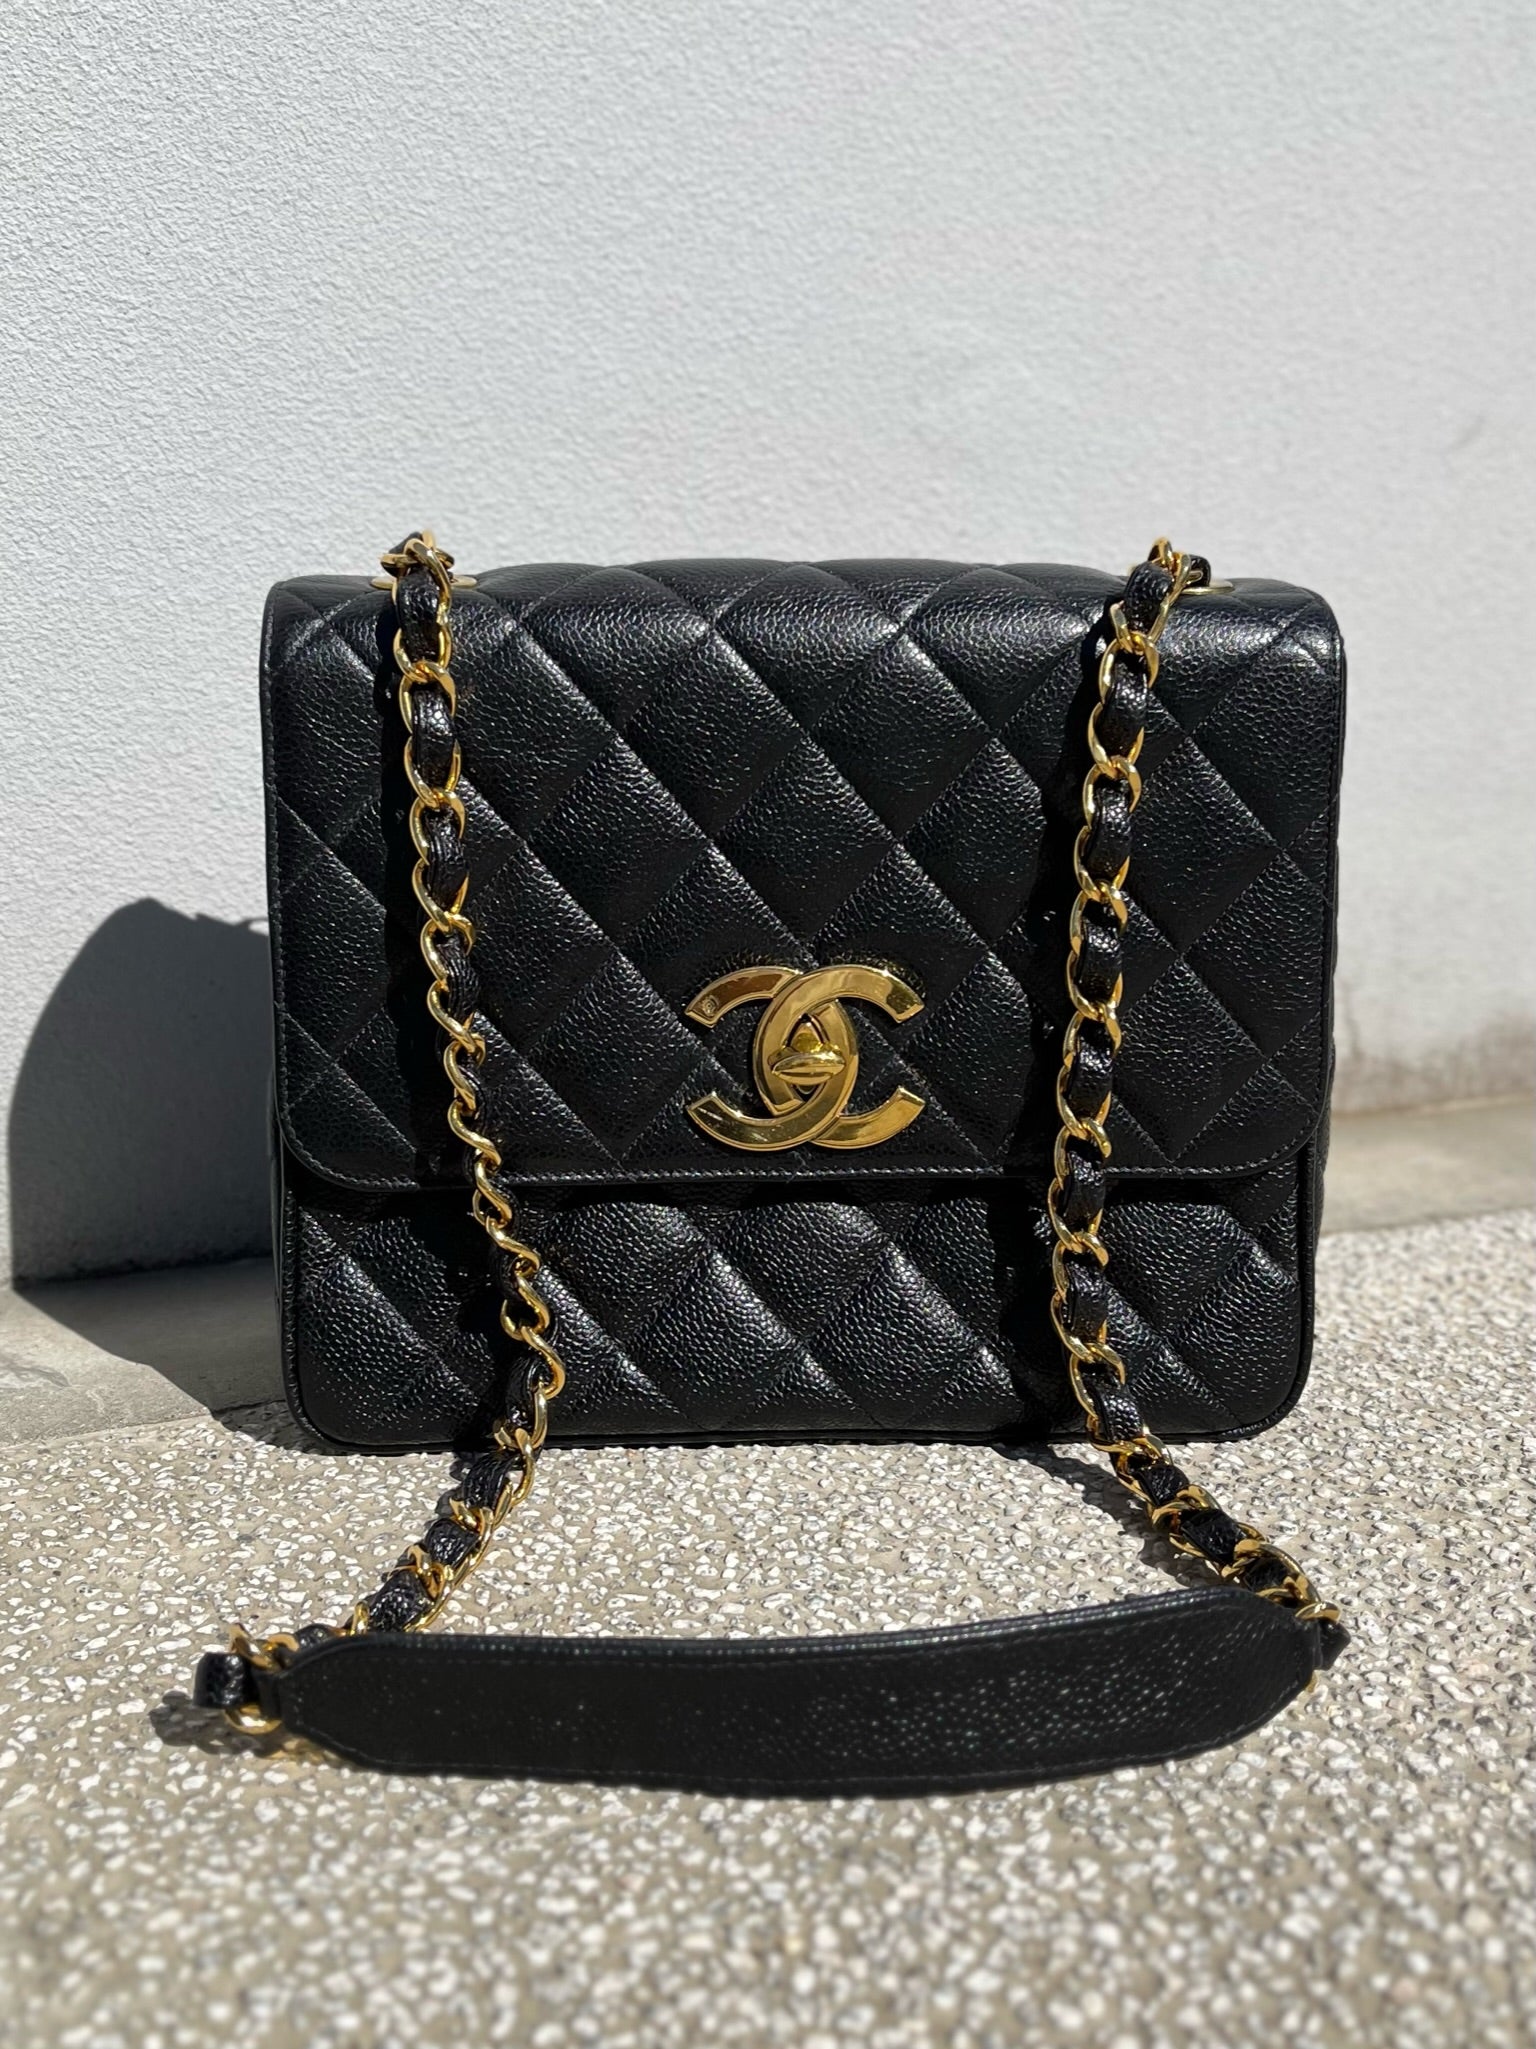 SOLD OUT！！【CHANEL】ヴィンテージ☆デカココバッグ